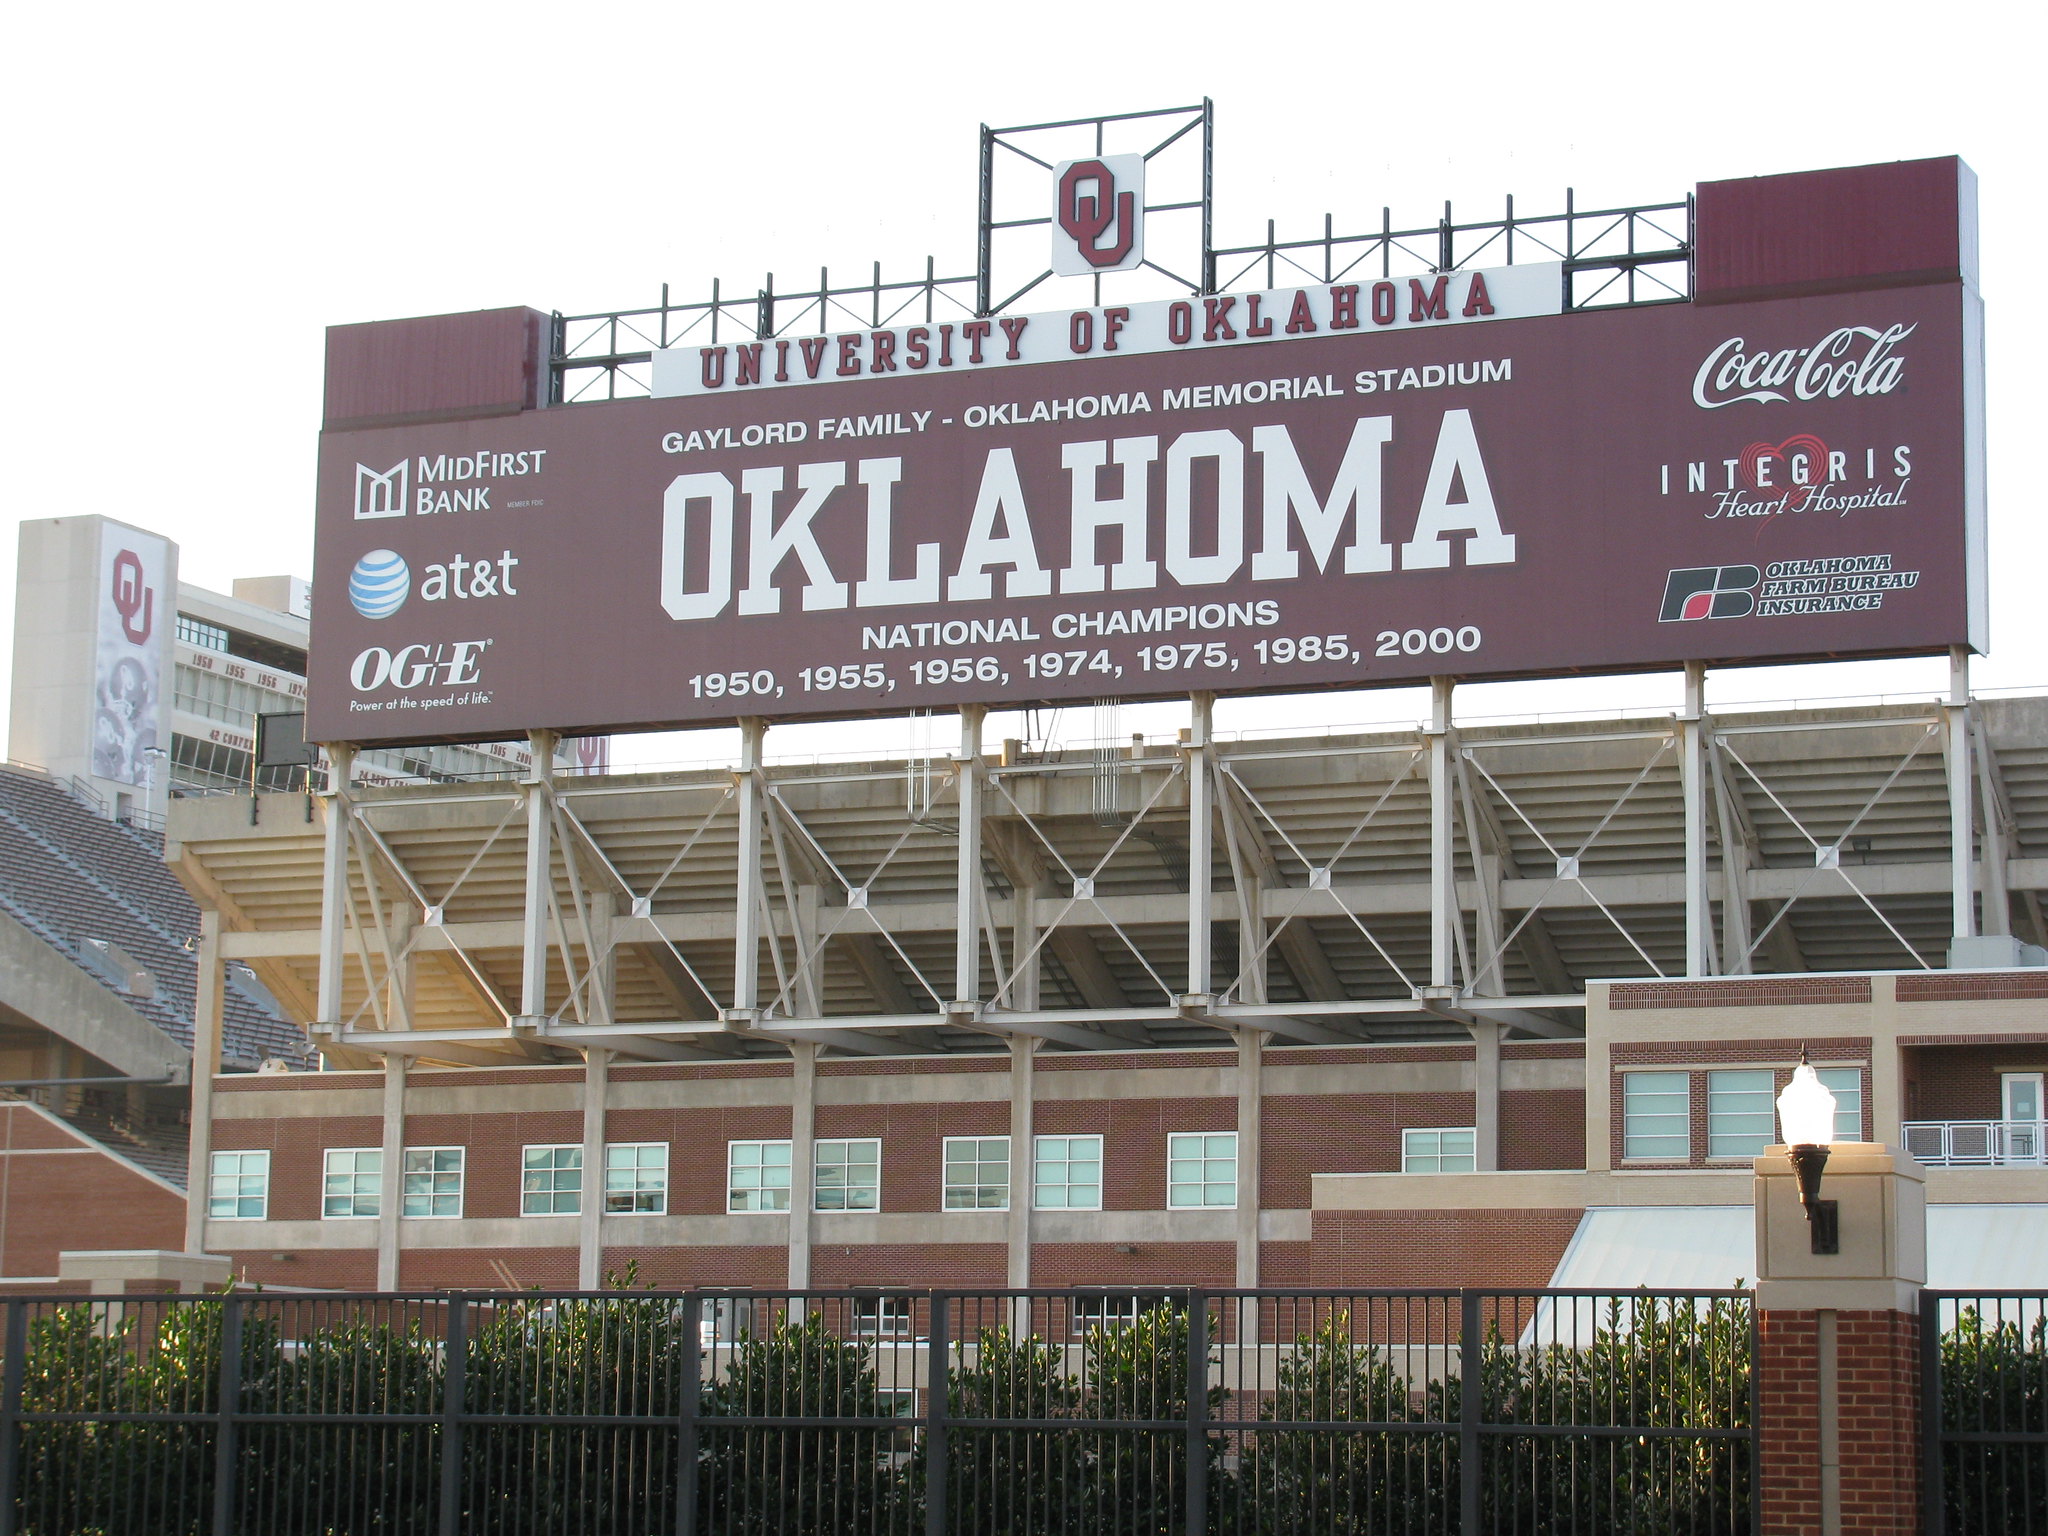 Today in terrorism Bombing at University of Oklahoma football game